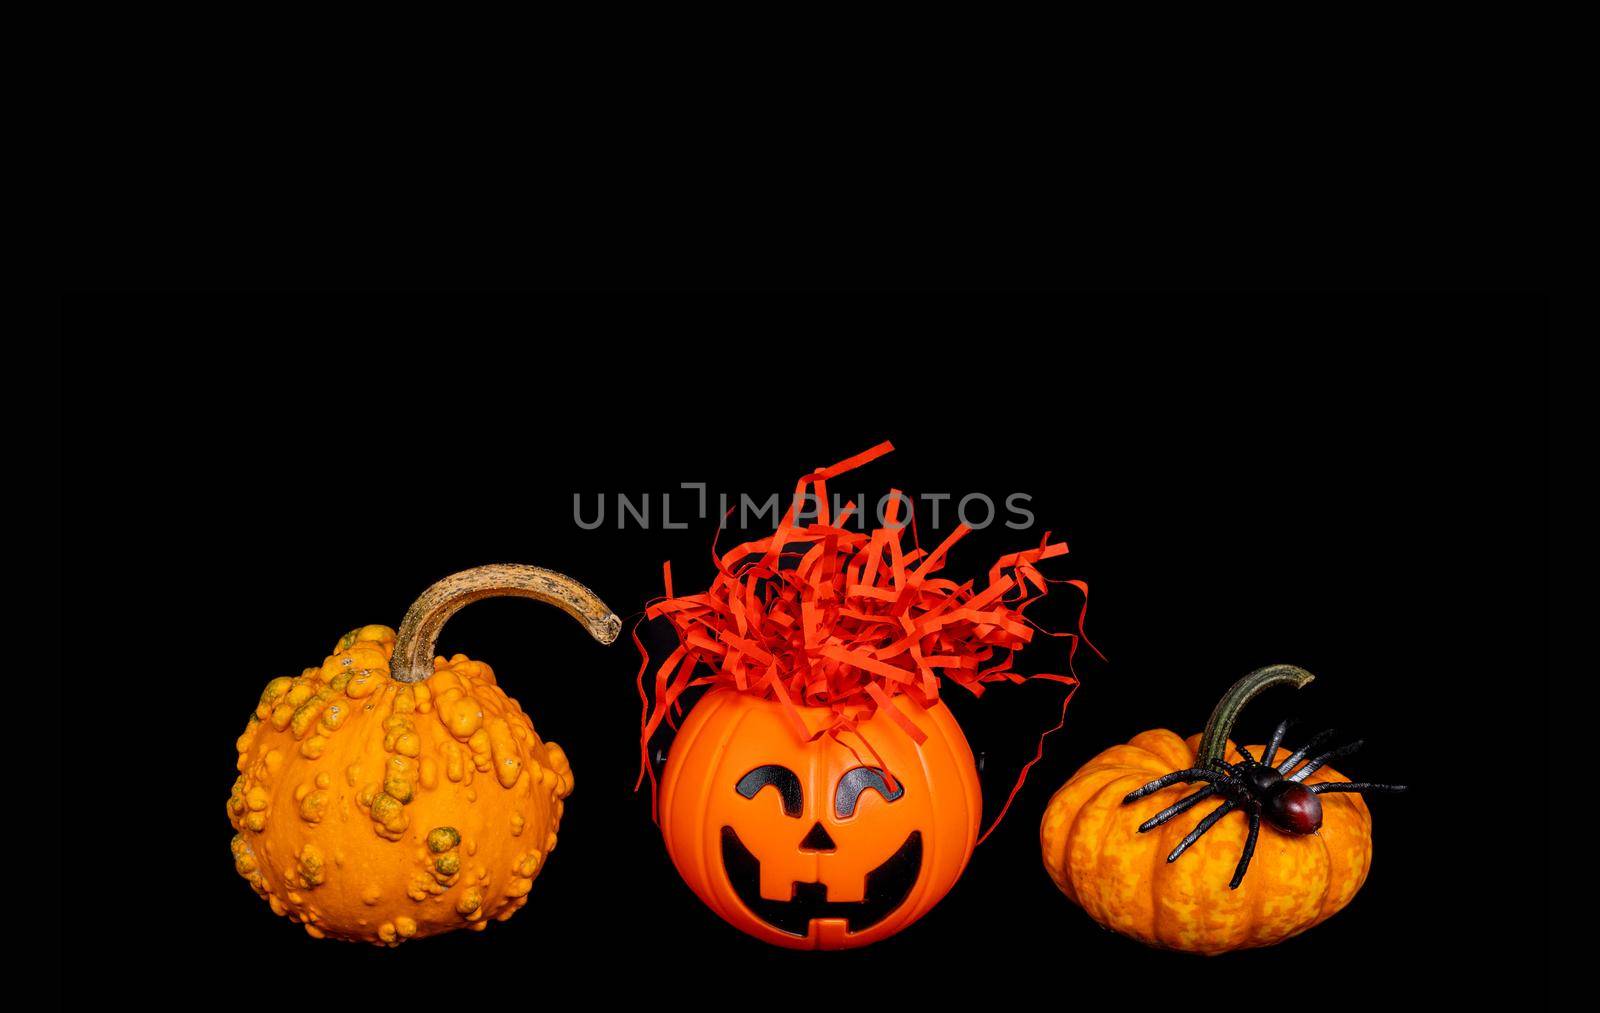 set, group of small funny pumpkins on black background in halloween style. Decorative elements - cobweb, spider, candy basket. Isolated object, easy to cut out for design, poster.